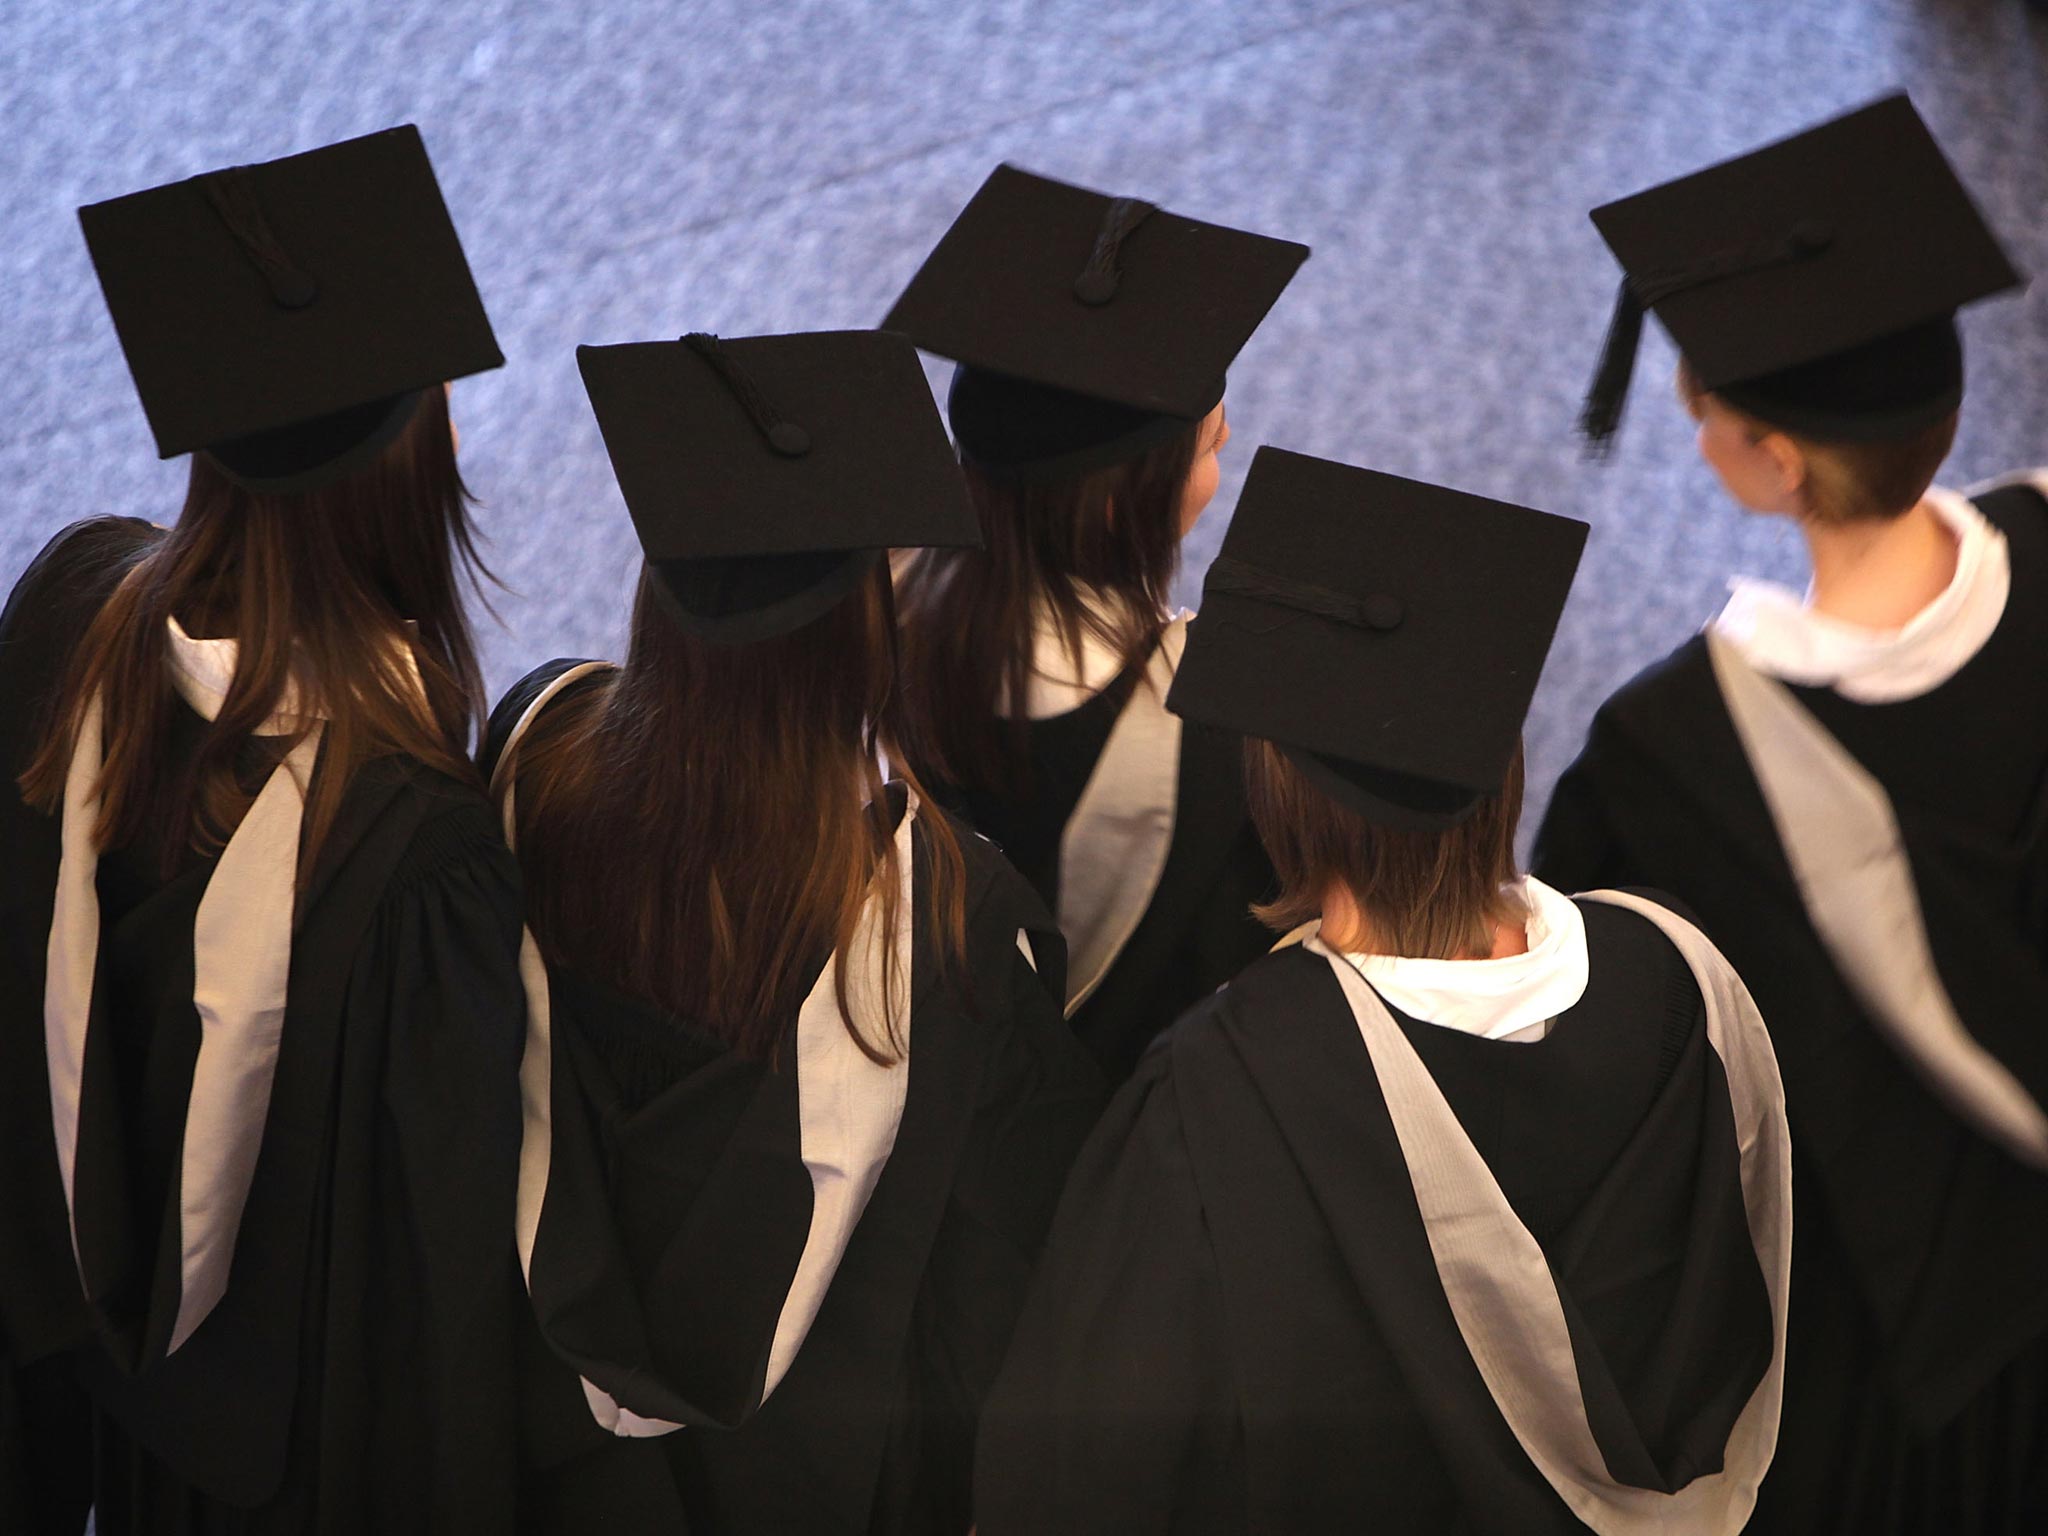 MPs have called for an urgent review of the student loan system